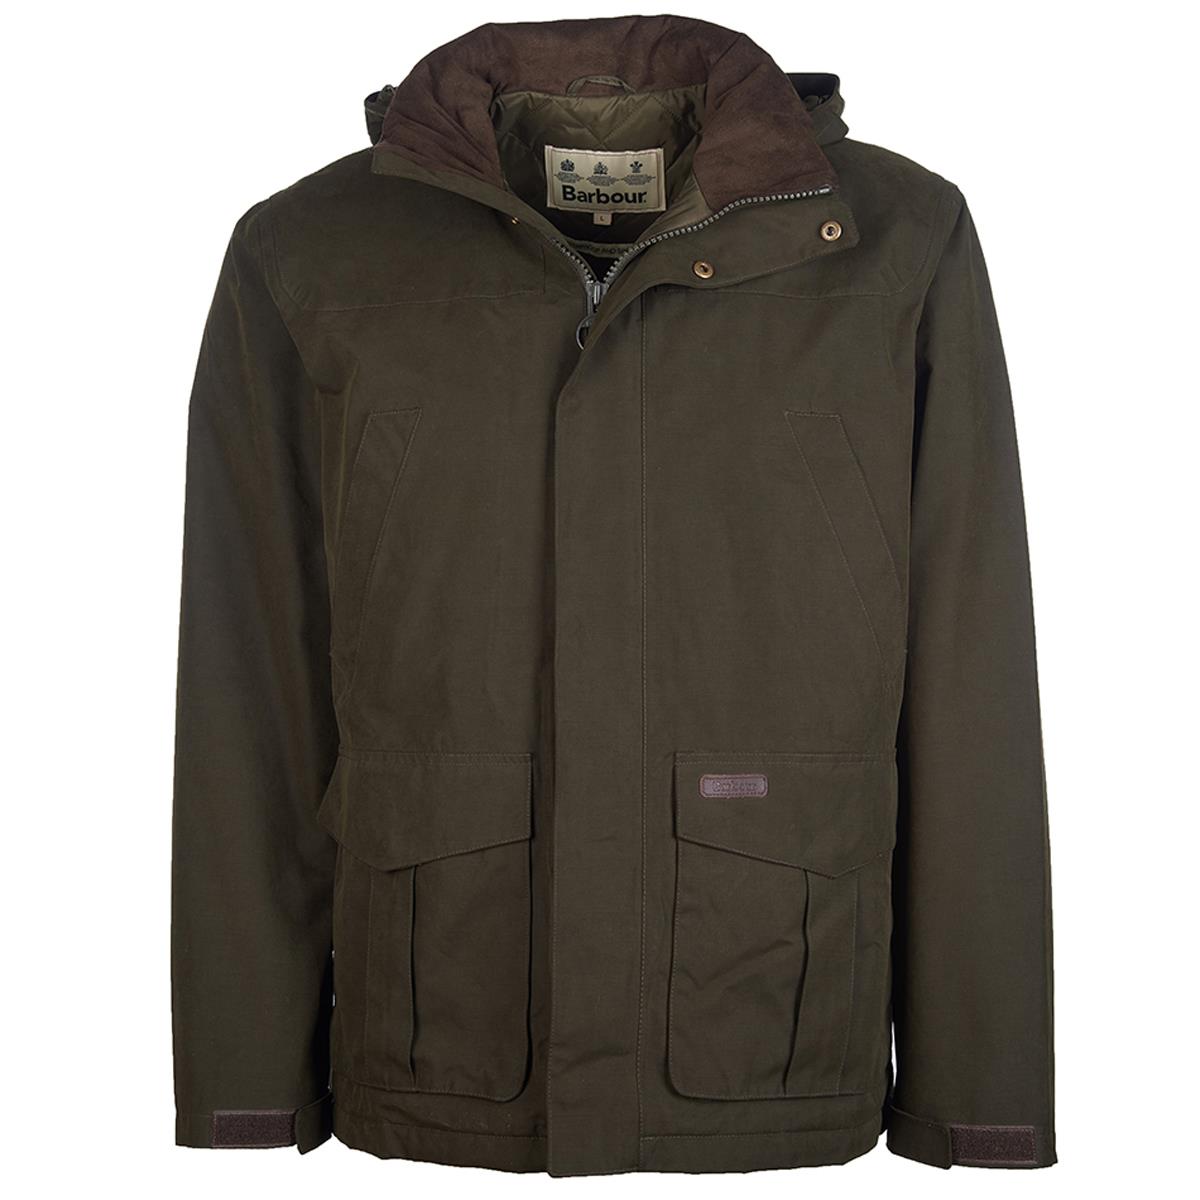 What is the PM Ref for the barbour brockstone jacket?